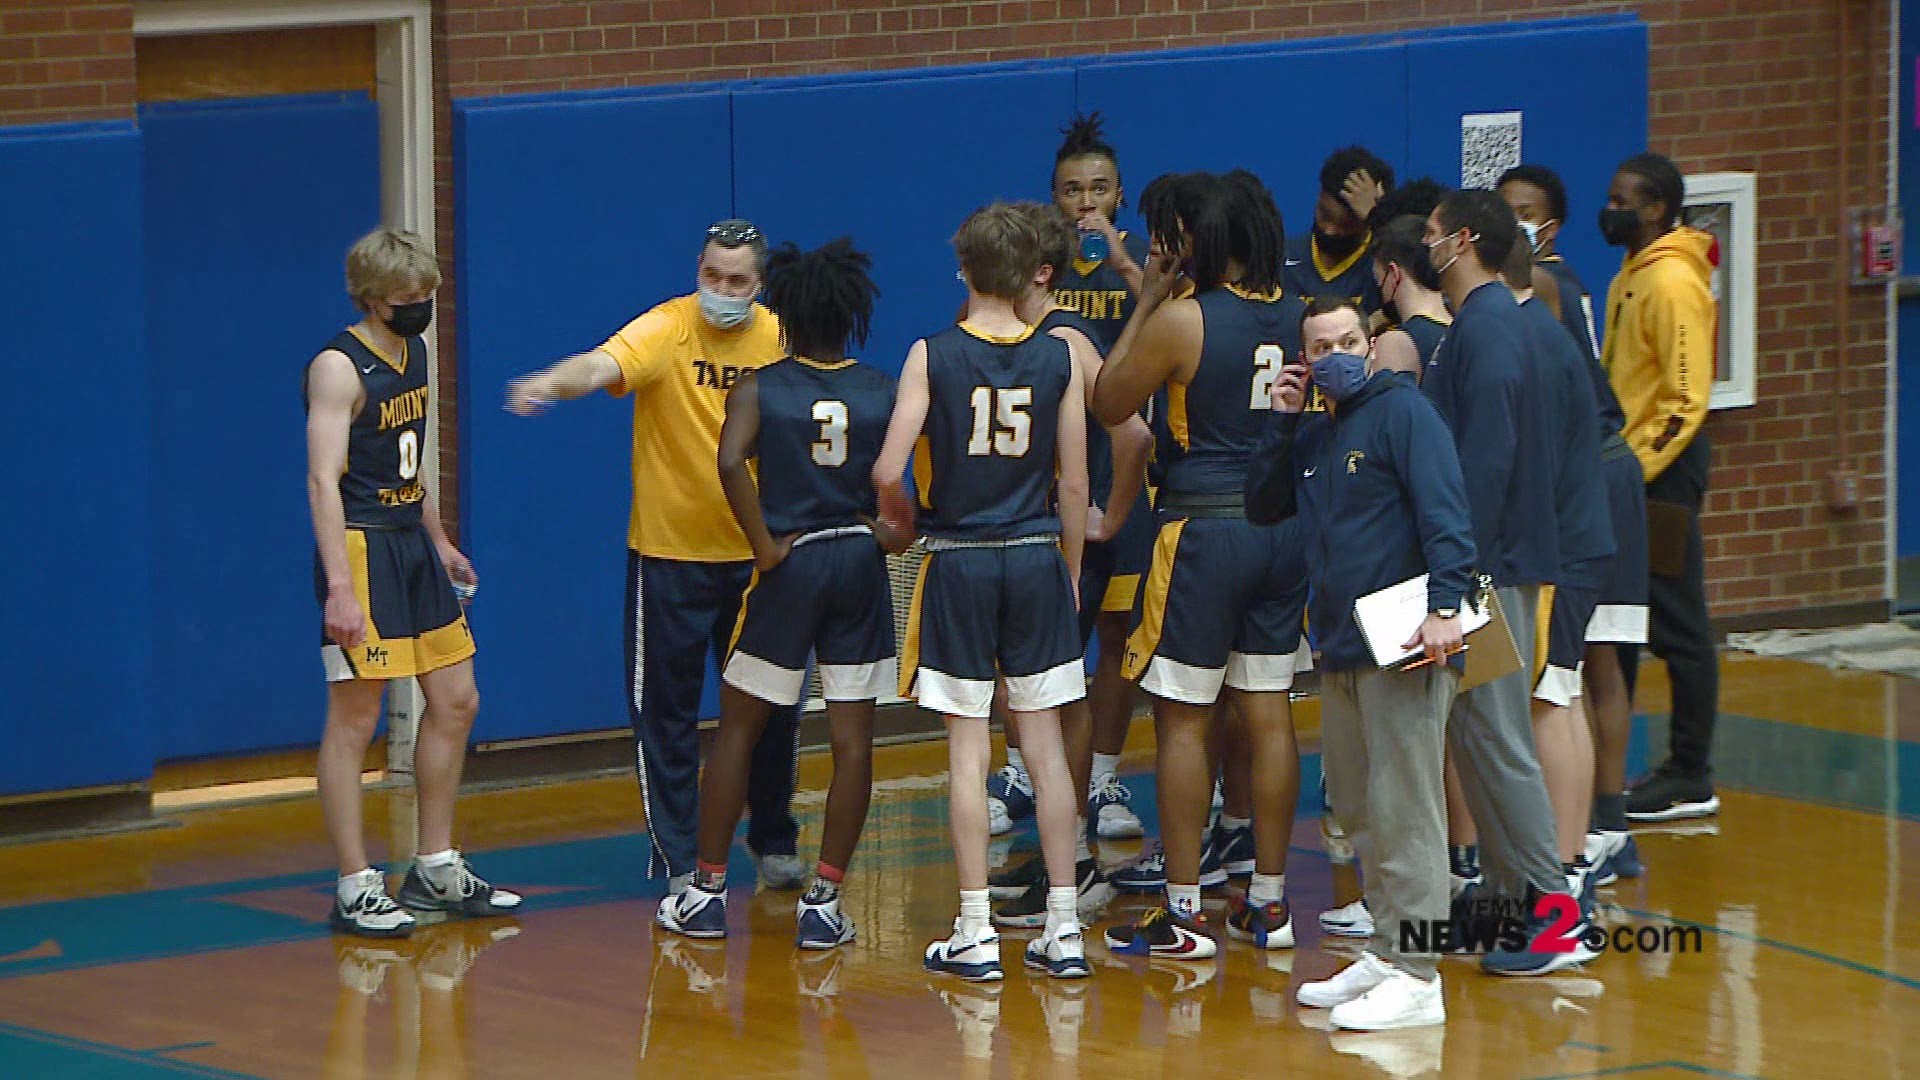 Mount Tabor wins it 52-44 and is now 4-2 on the season